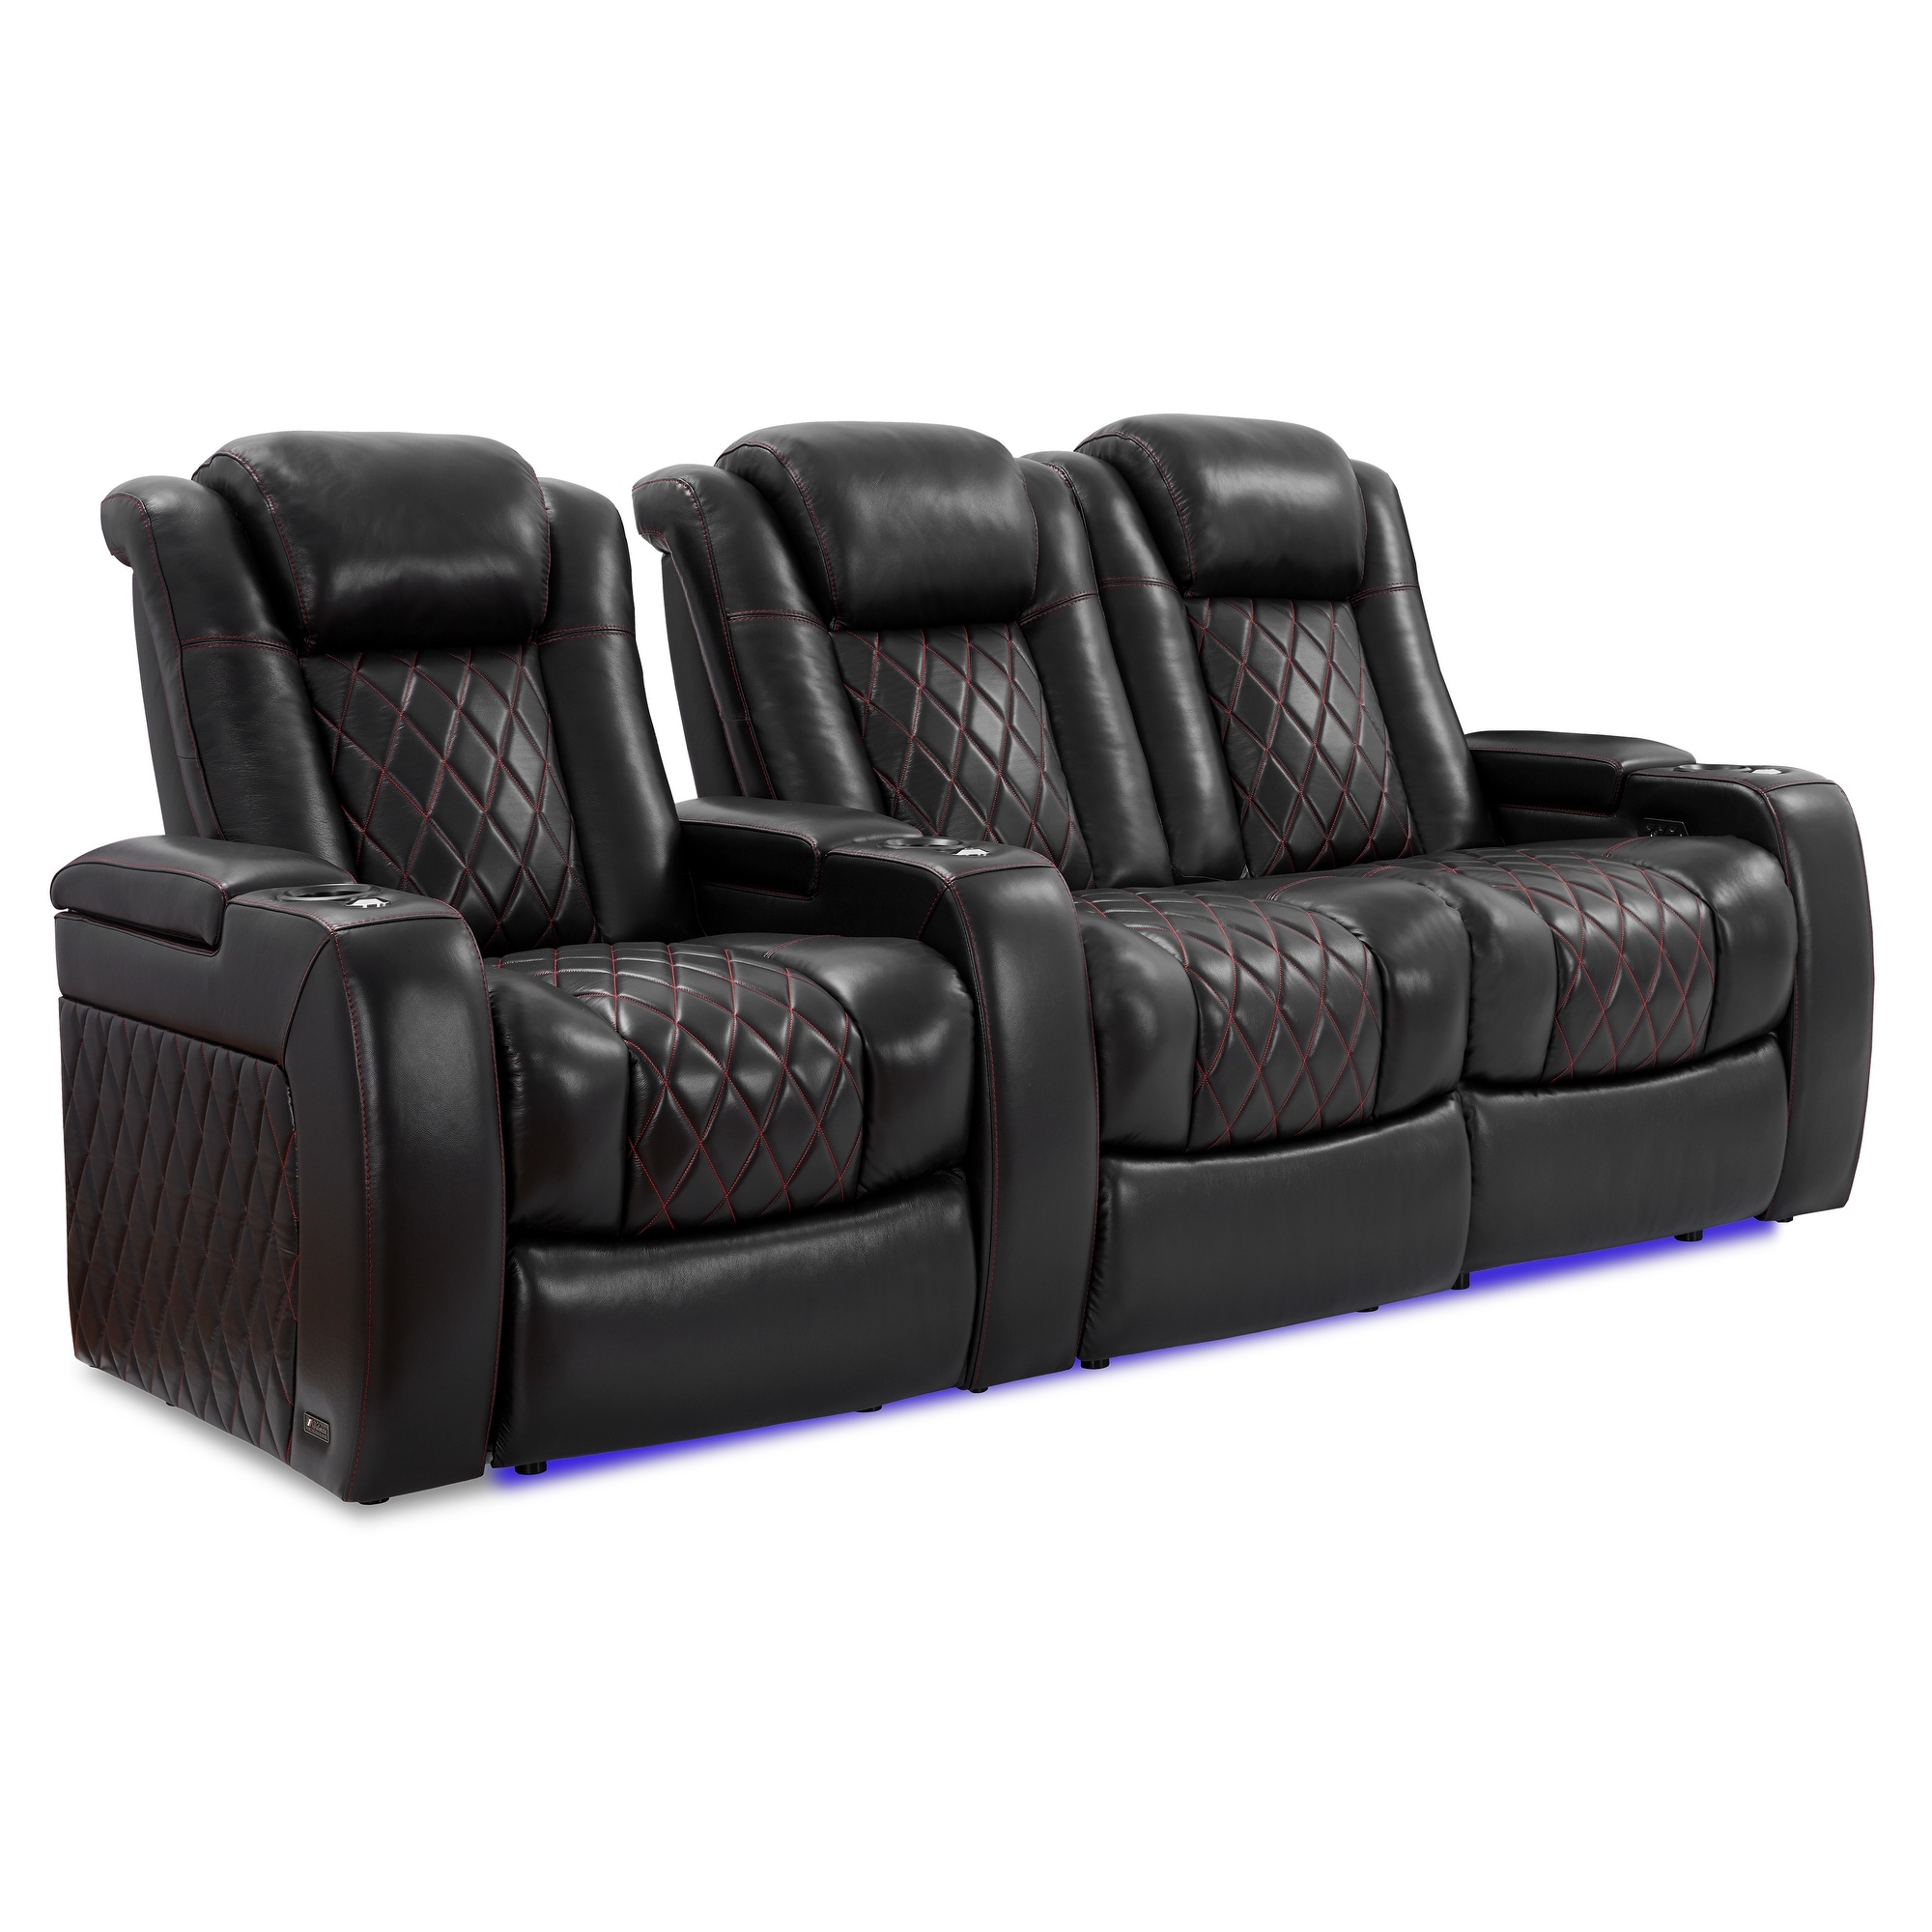 Tuscany Theater Seating with Built-In Powered Heating